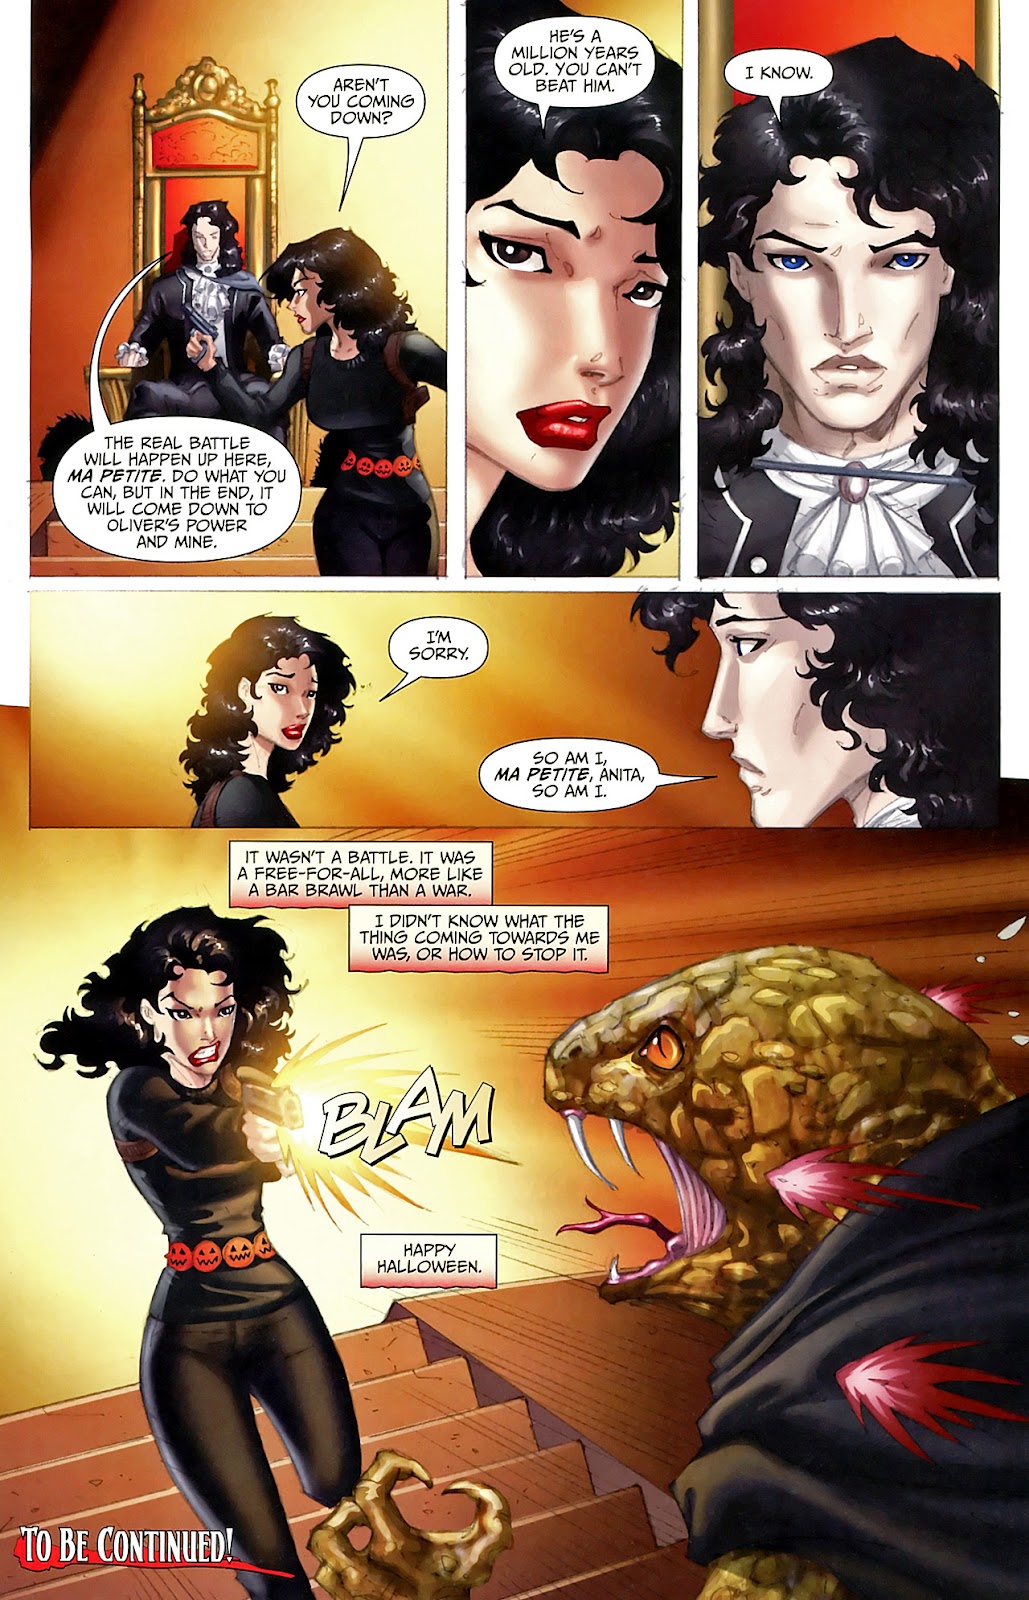 Anita Blake, Vampire Hunter: Circus of the Damned - The Scoundrel issue 4 - Page 23